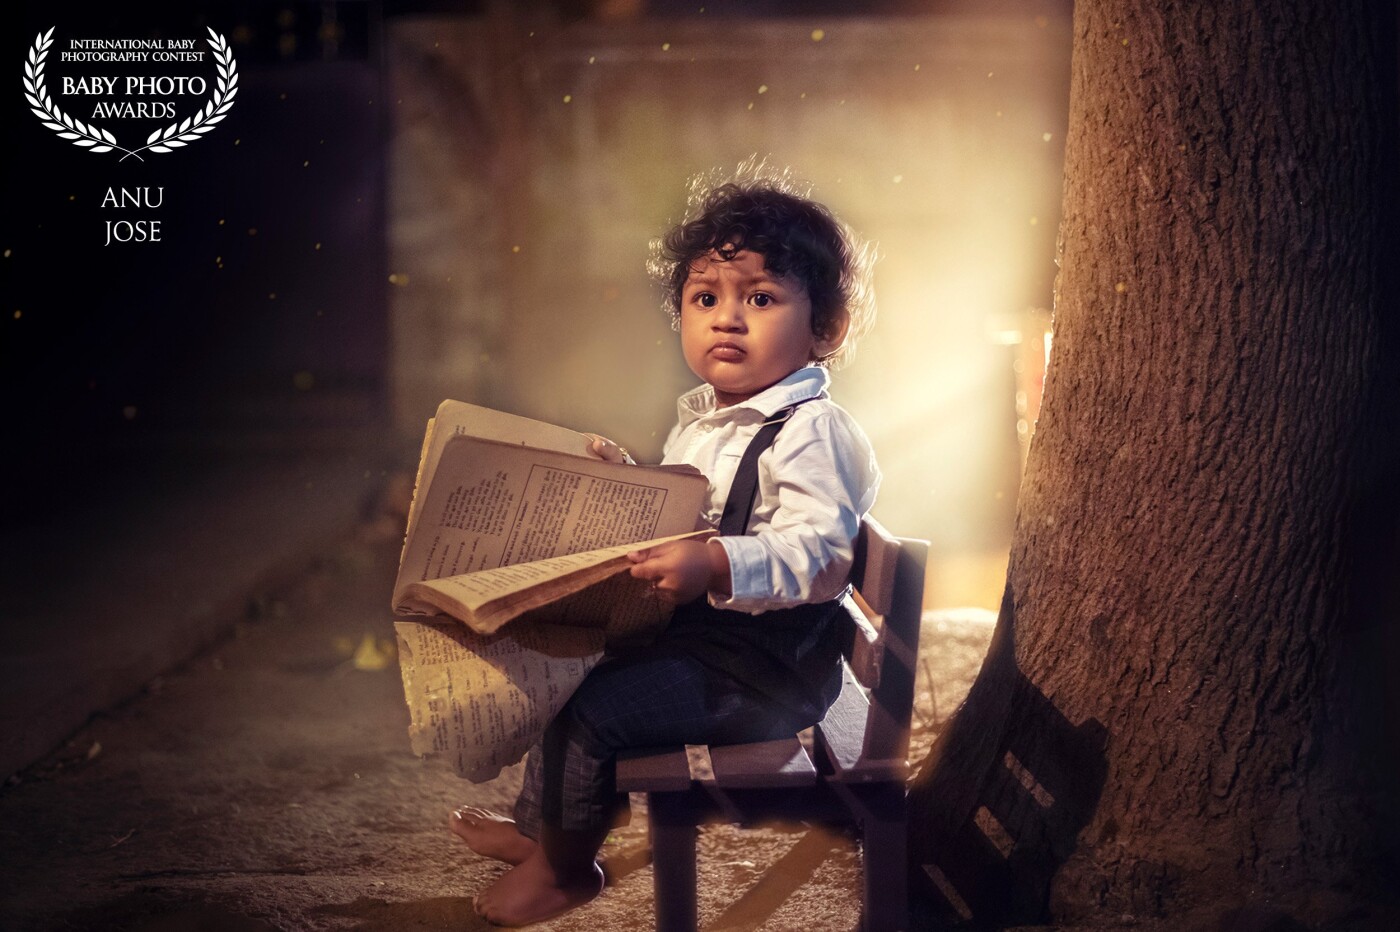 "THE LITTLE MAN" <br />
This picture was shot on the concept of magical power of little child, And during culling process we found this image fit more to the concept because of his attitude. <br />
Thanks for choosing this image!